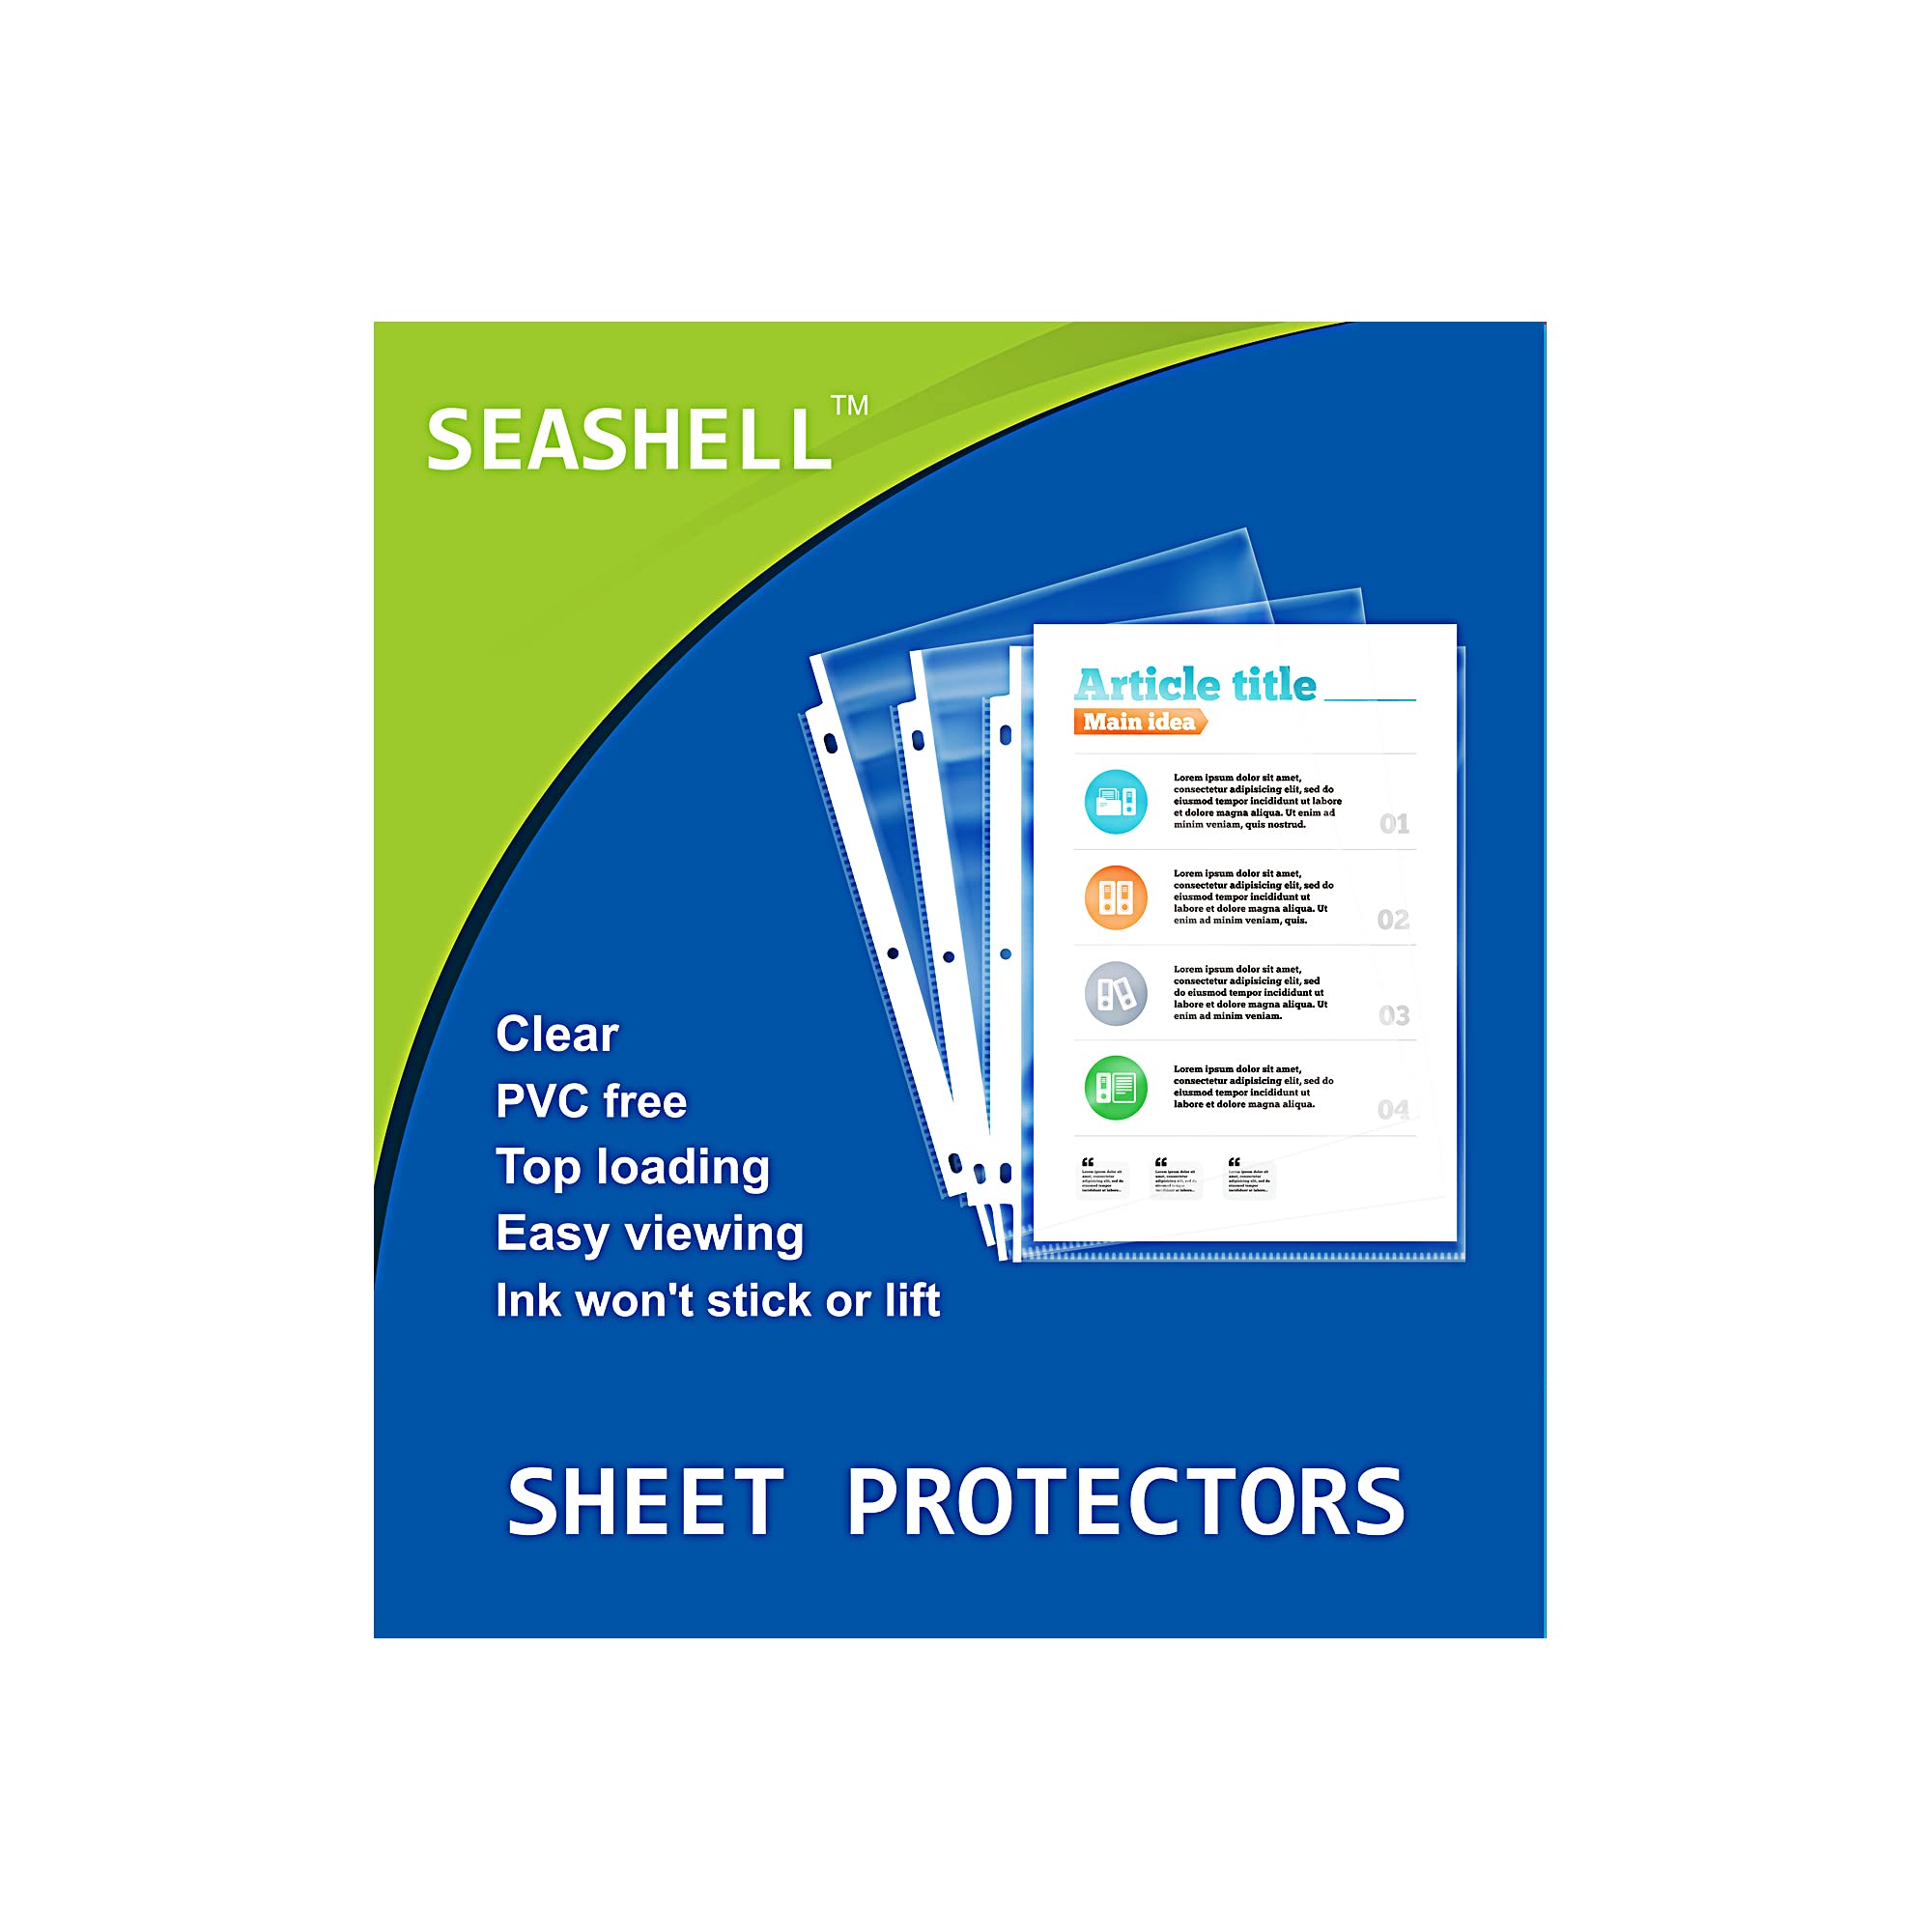 Seashell 200 Pack Heavy Duty Sheet Protectors 85 X 11,Clear Paper Protectors For 3 Ring Binder, Letter Size Plastic Sleeves For